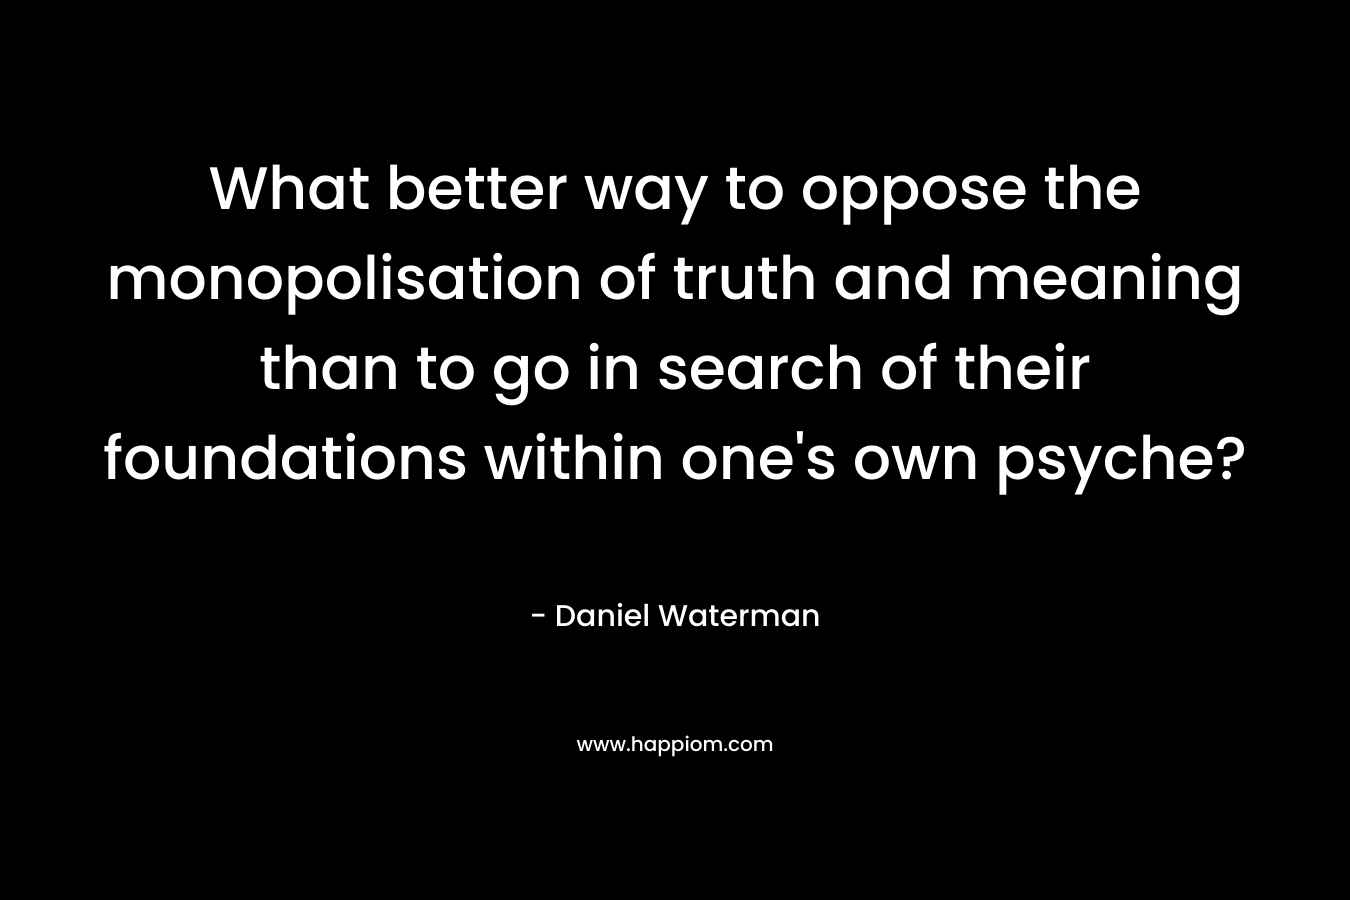 What better way to oppose the monopolisation of truth and meaning than to go in search of their foundations within one's own psyche?